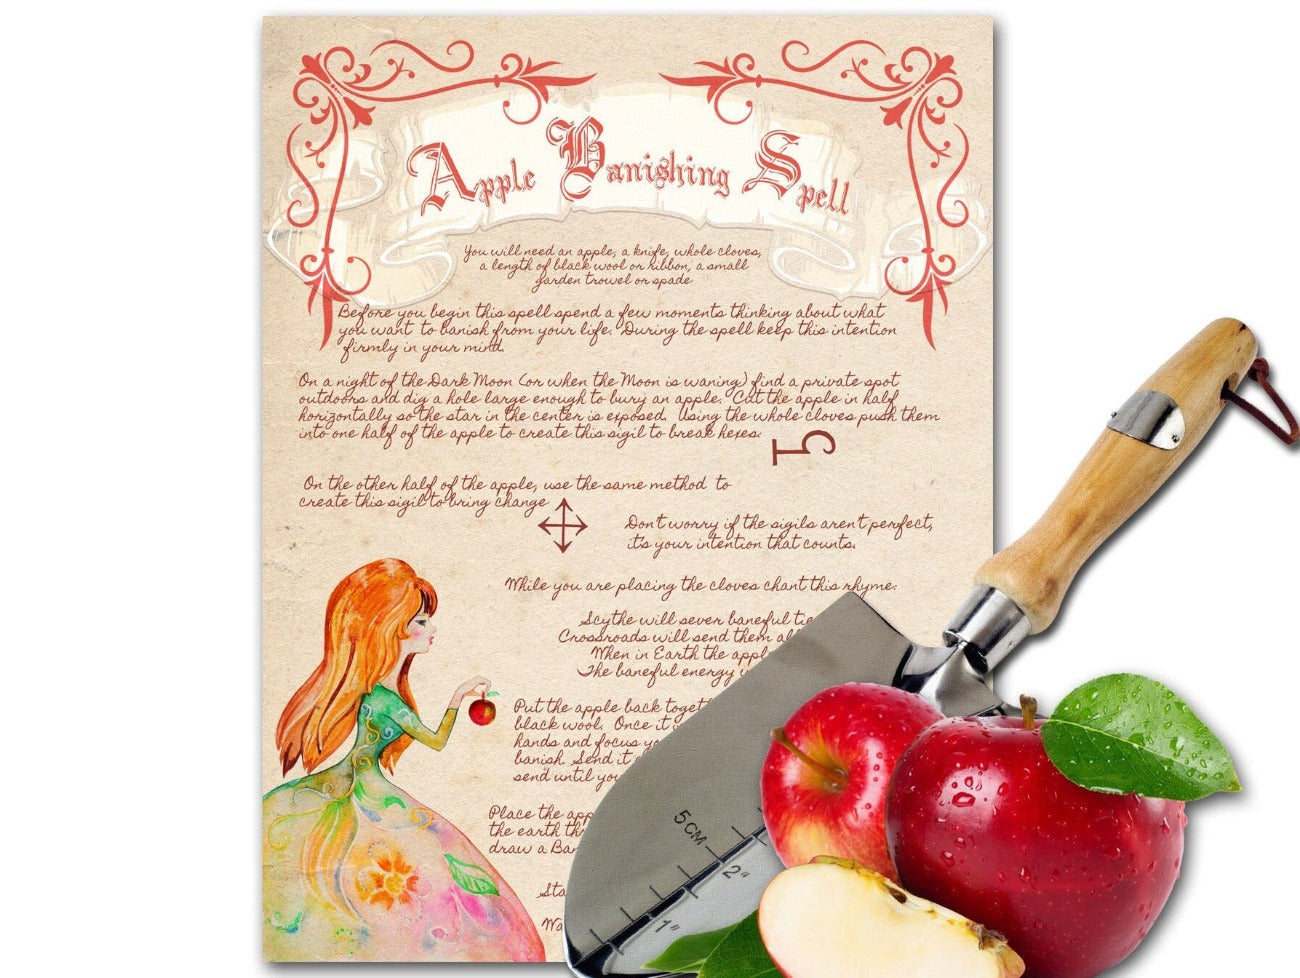 APPLE BANISHING SPELL, Charmed Style Spell, Wicca Witchcraft Magic Poison Apple, How to Use Apples in Spells, Banish Negative Energy - Morgana Magick Spell